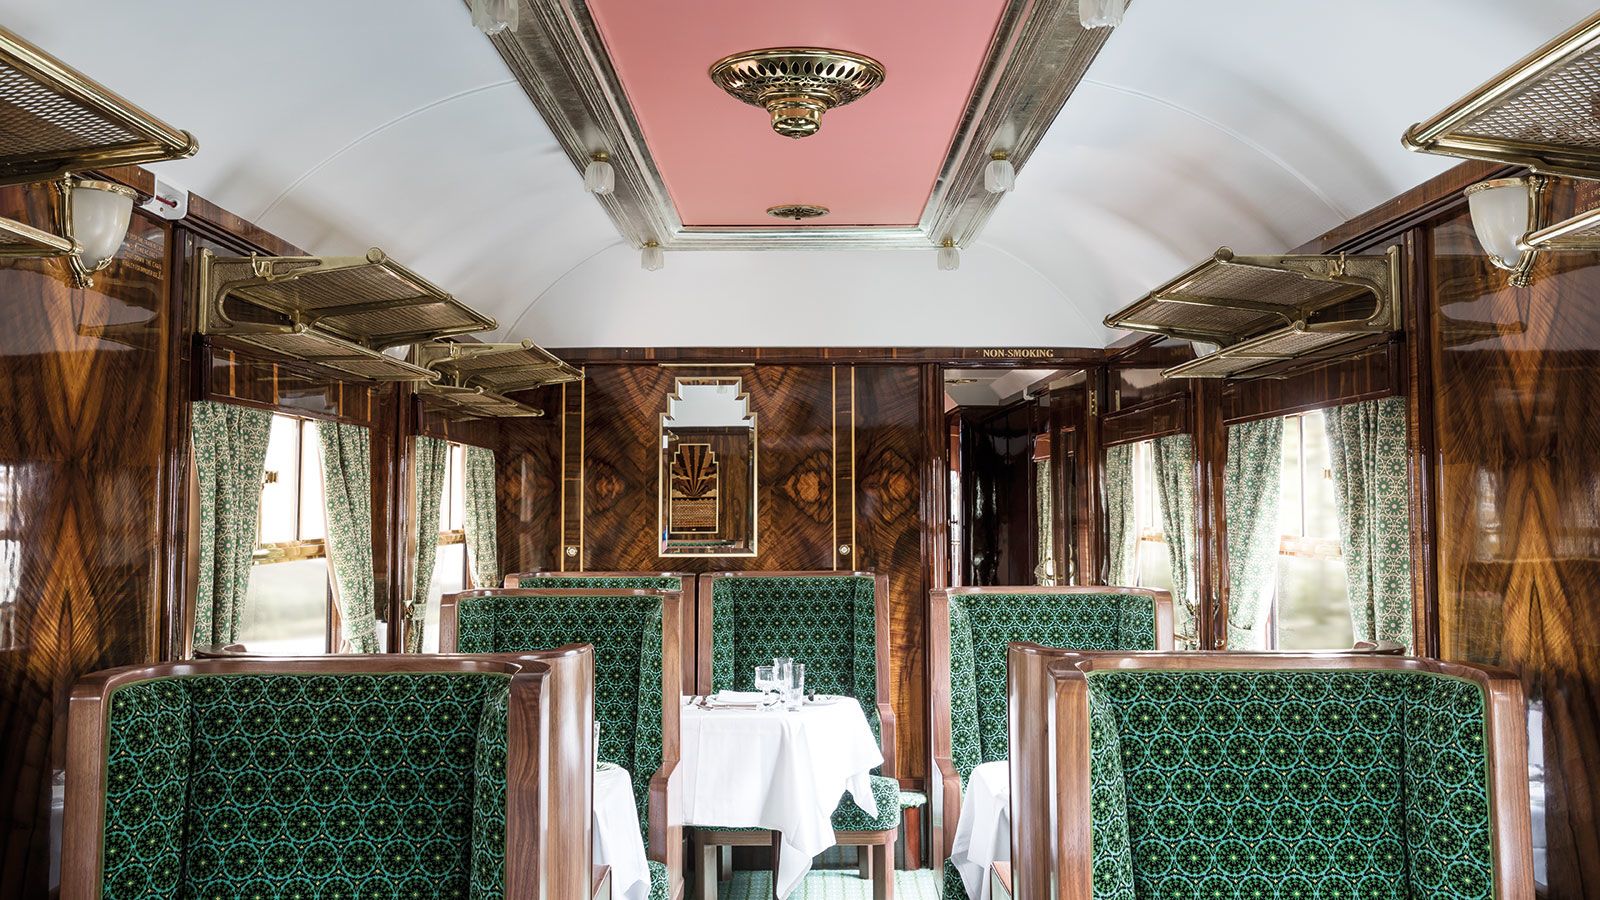 Filmmaker Wes Anderson Designed a Real Train Car You Can Ride In